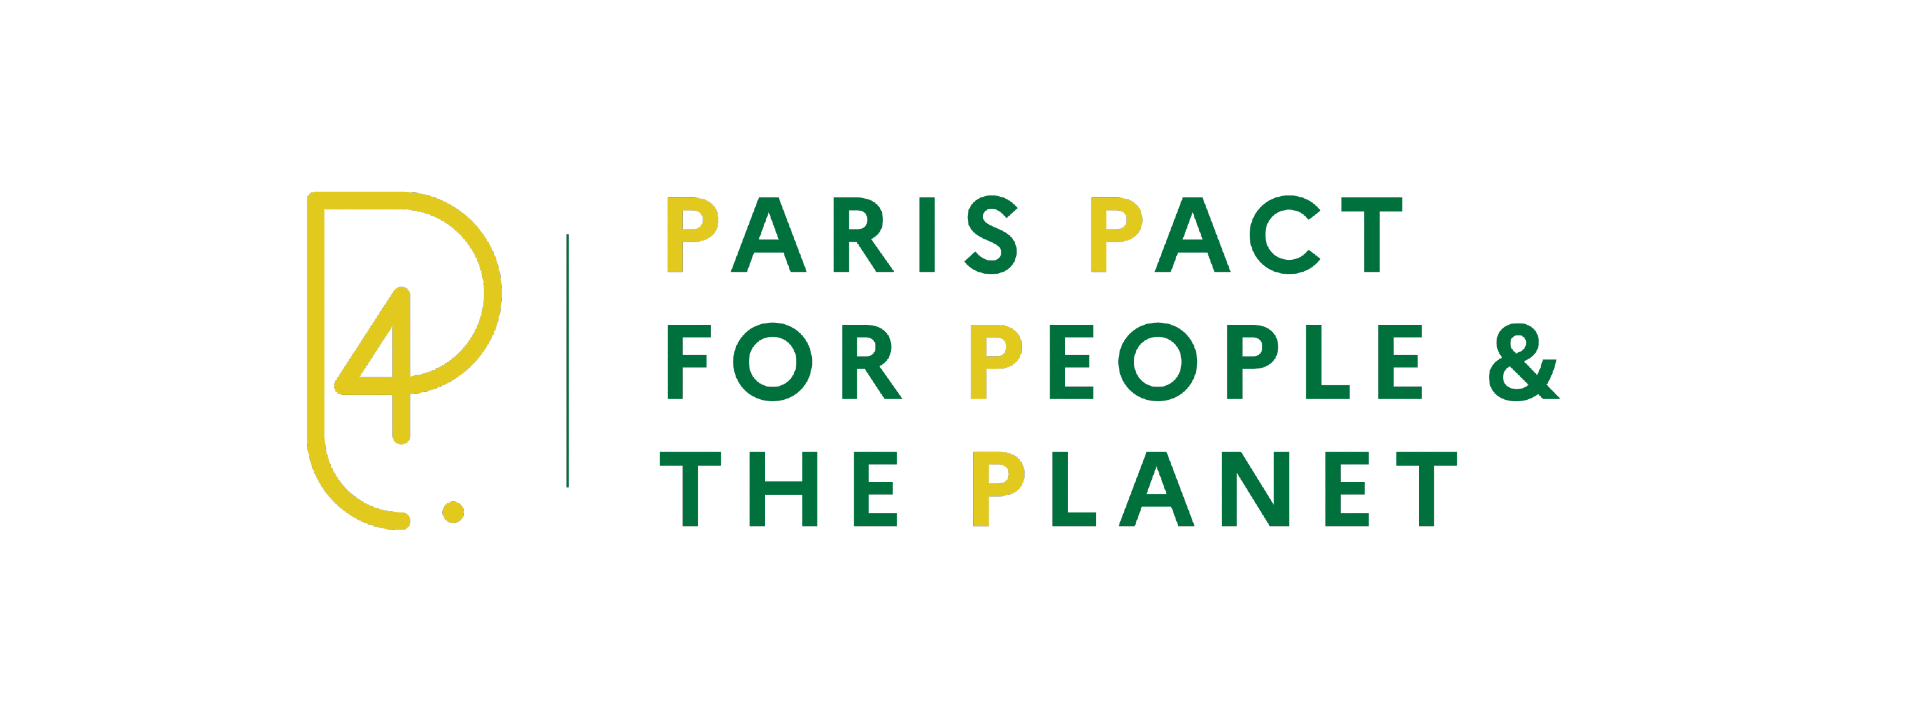 Paris pact for people and the planet